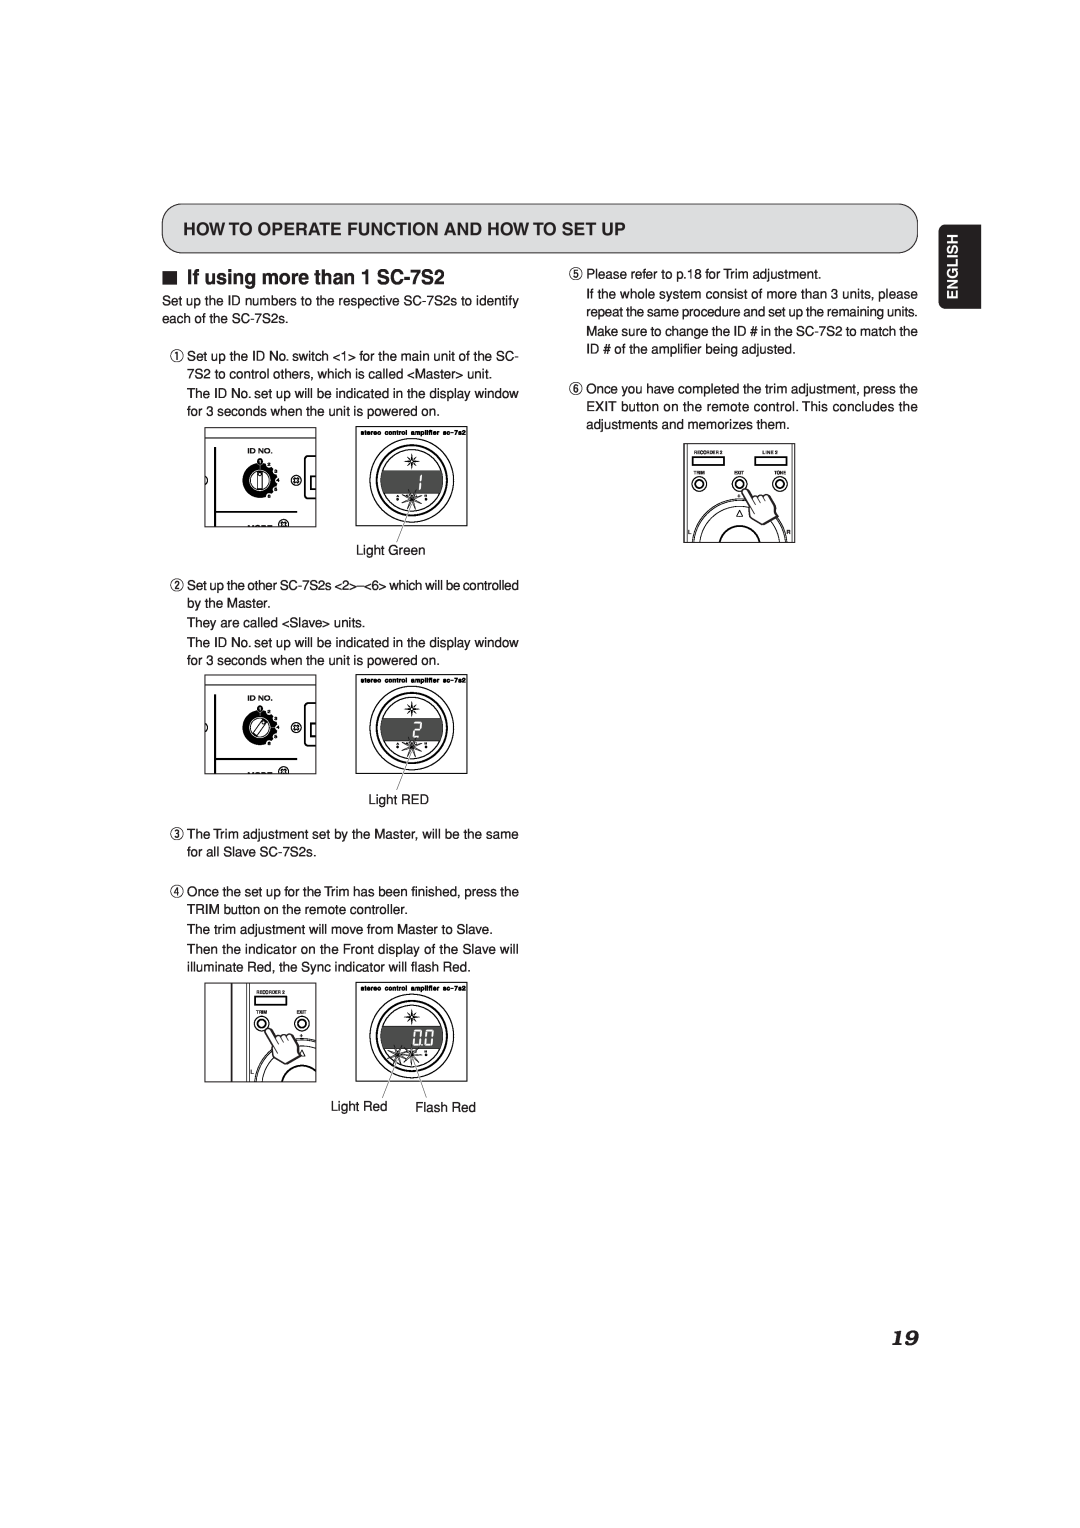 Marantz manual 7If using more than 1 SC-7S2, How To Operate Function And How To Set Up 